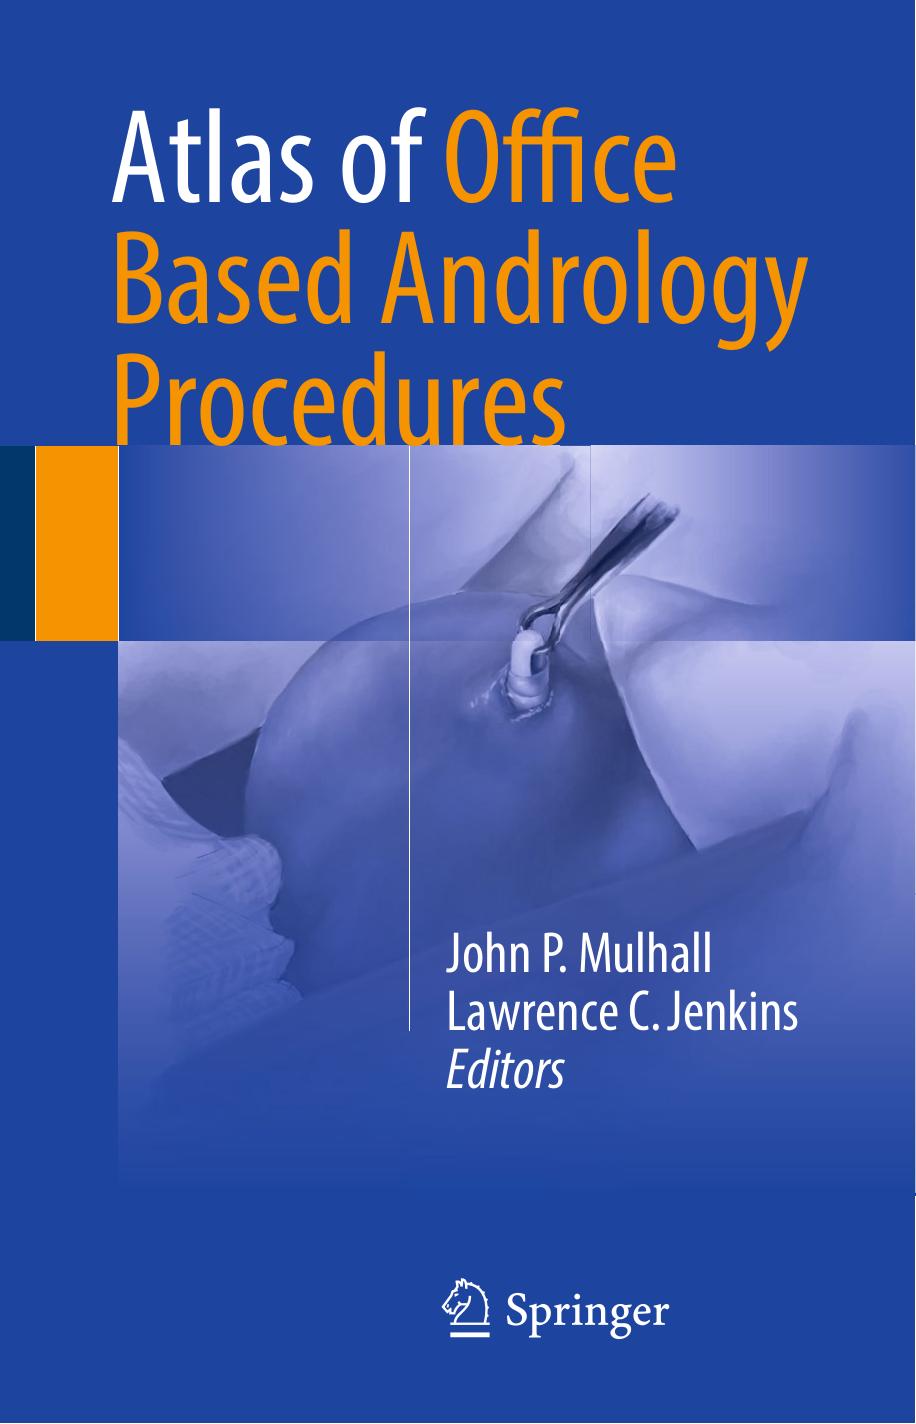 Atlas of Office Based Andrology Procedures 2017